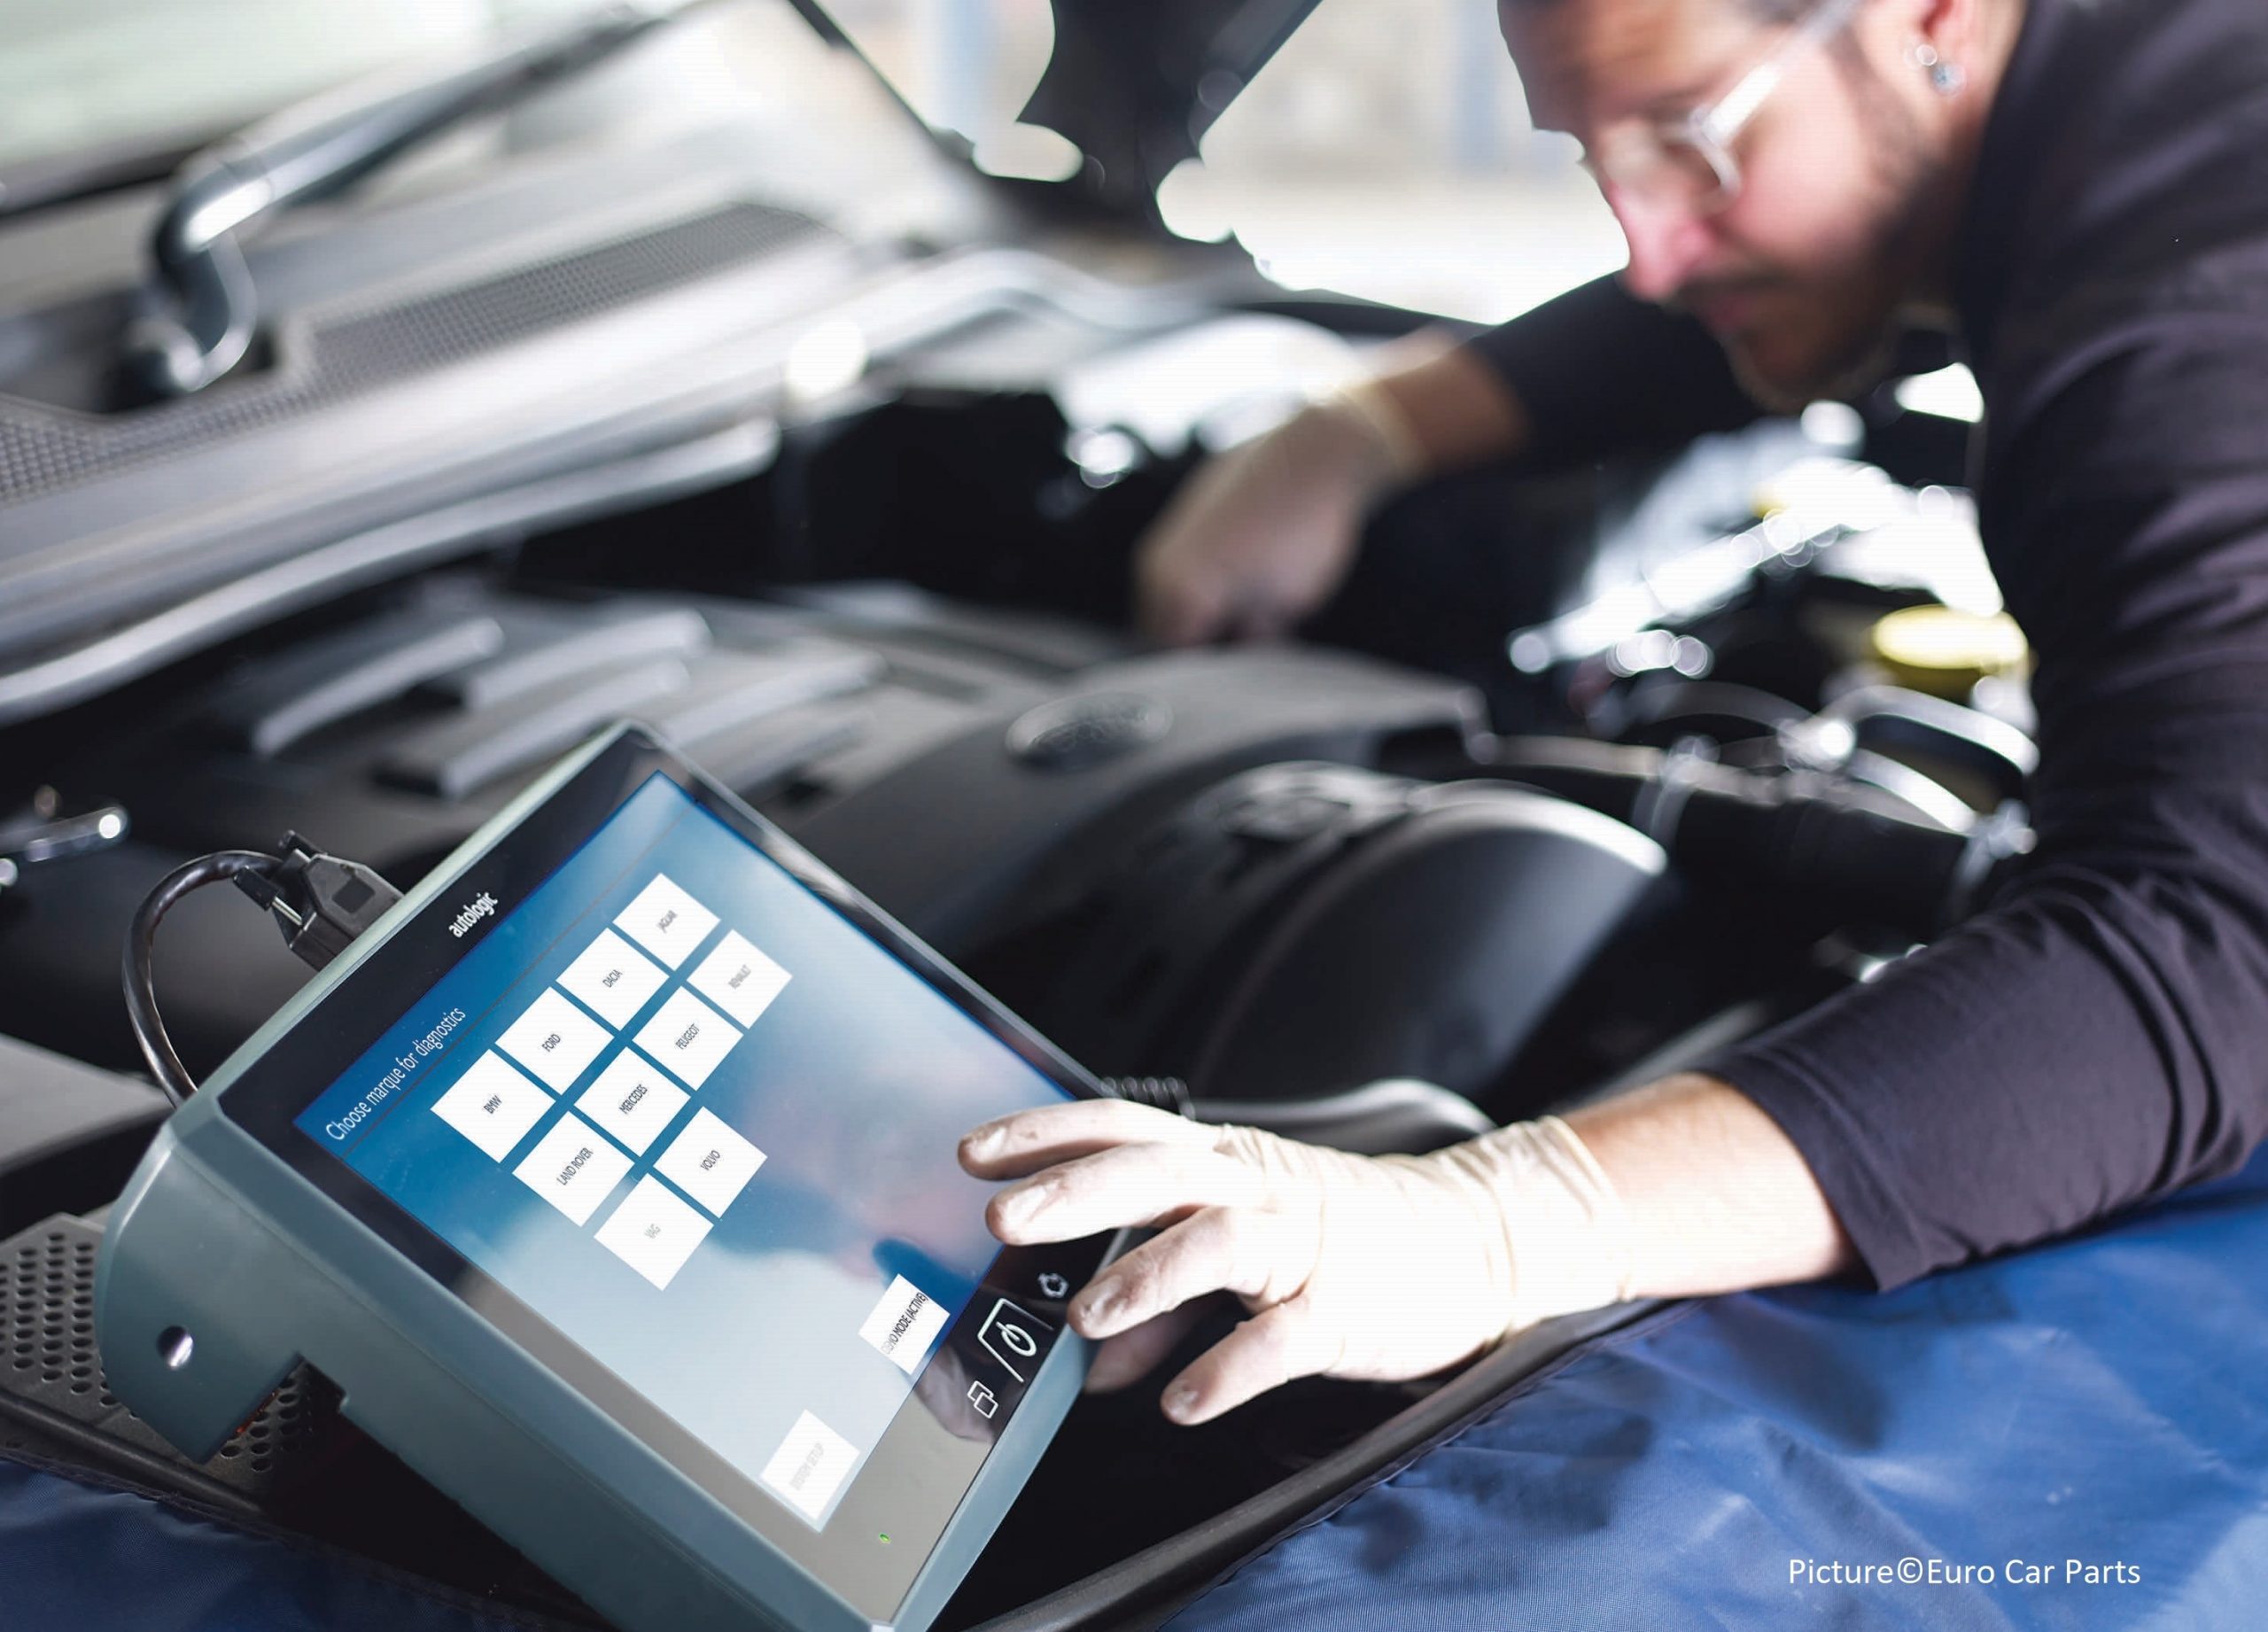 mechanic looks at diagnostic computer while under a car's bonnet inspecting the engine